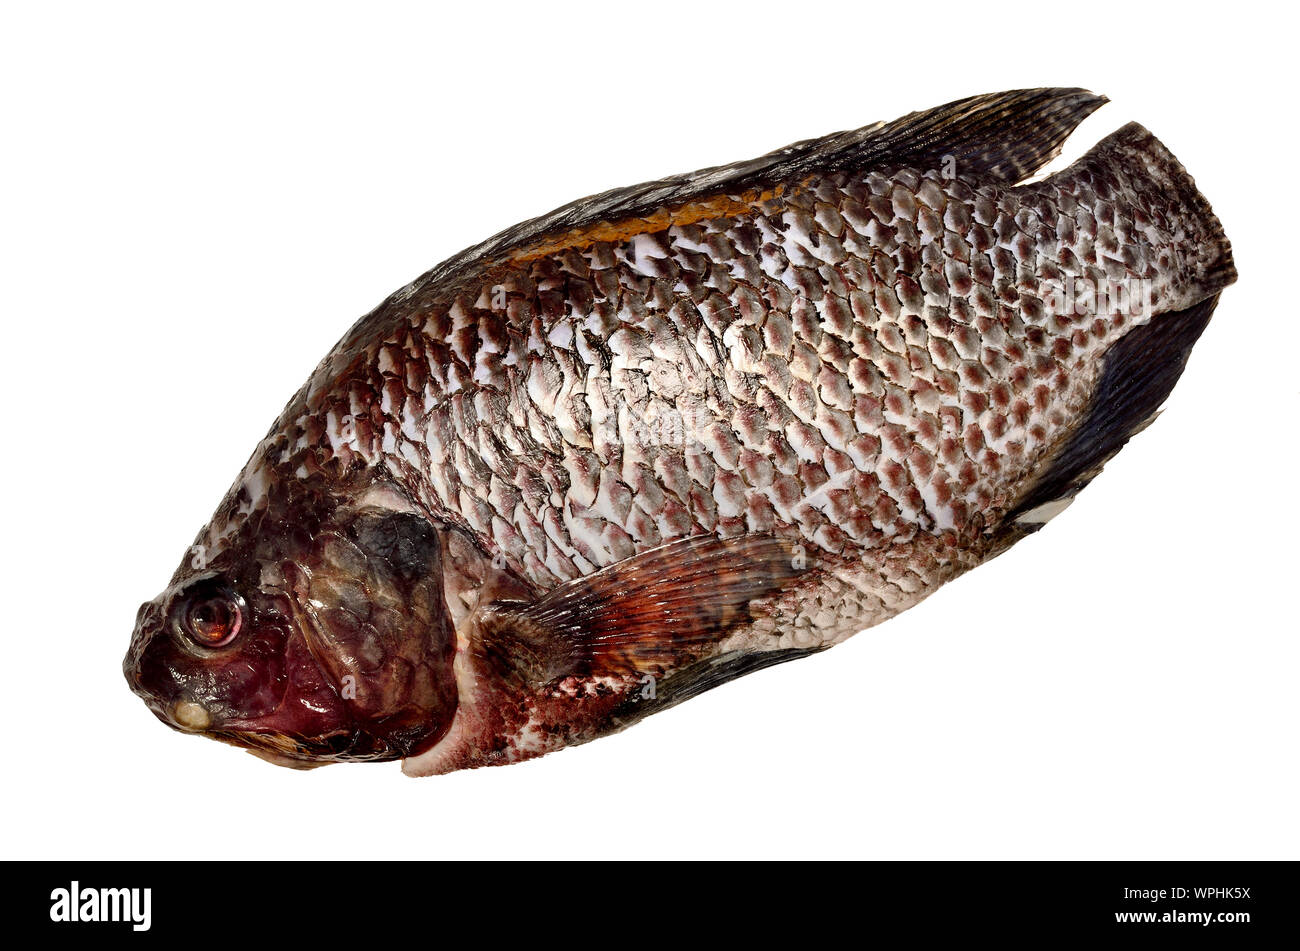 Black Tilapia fish bought from a British supermarket Stock Photo